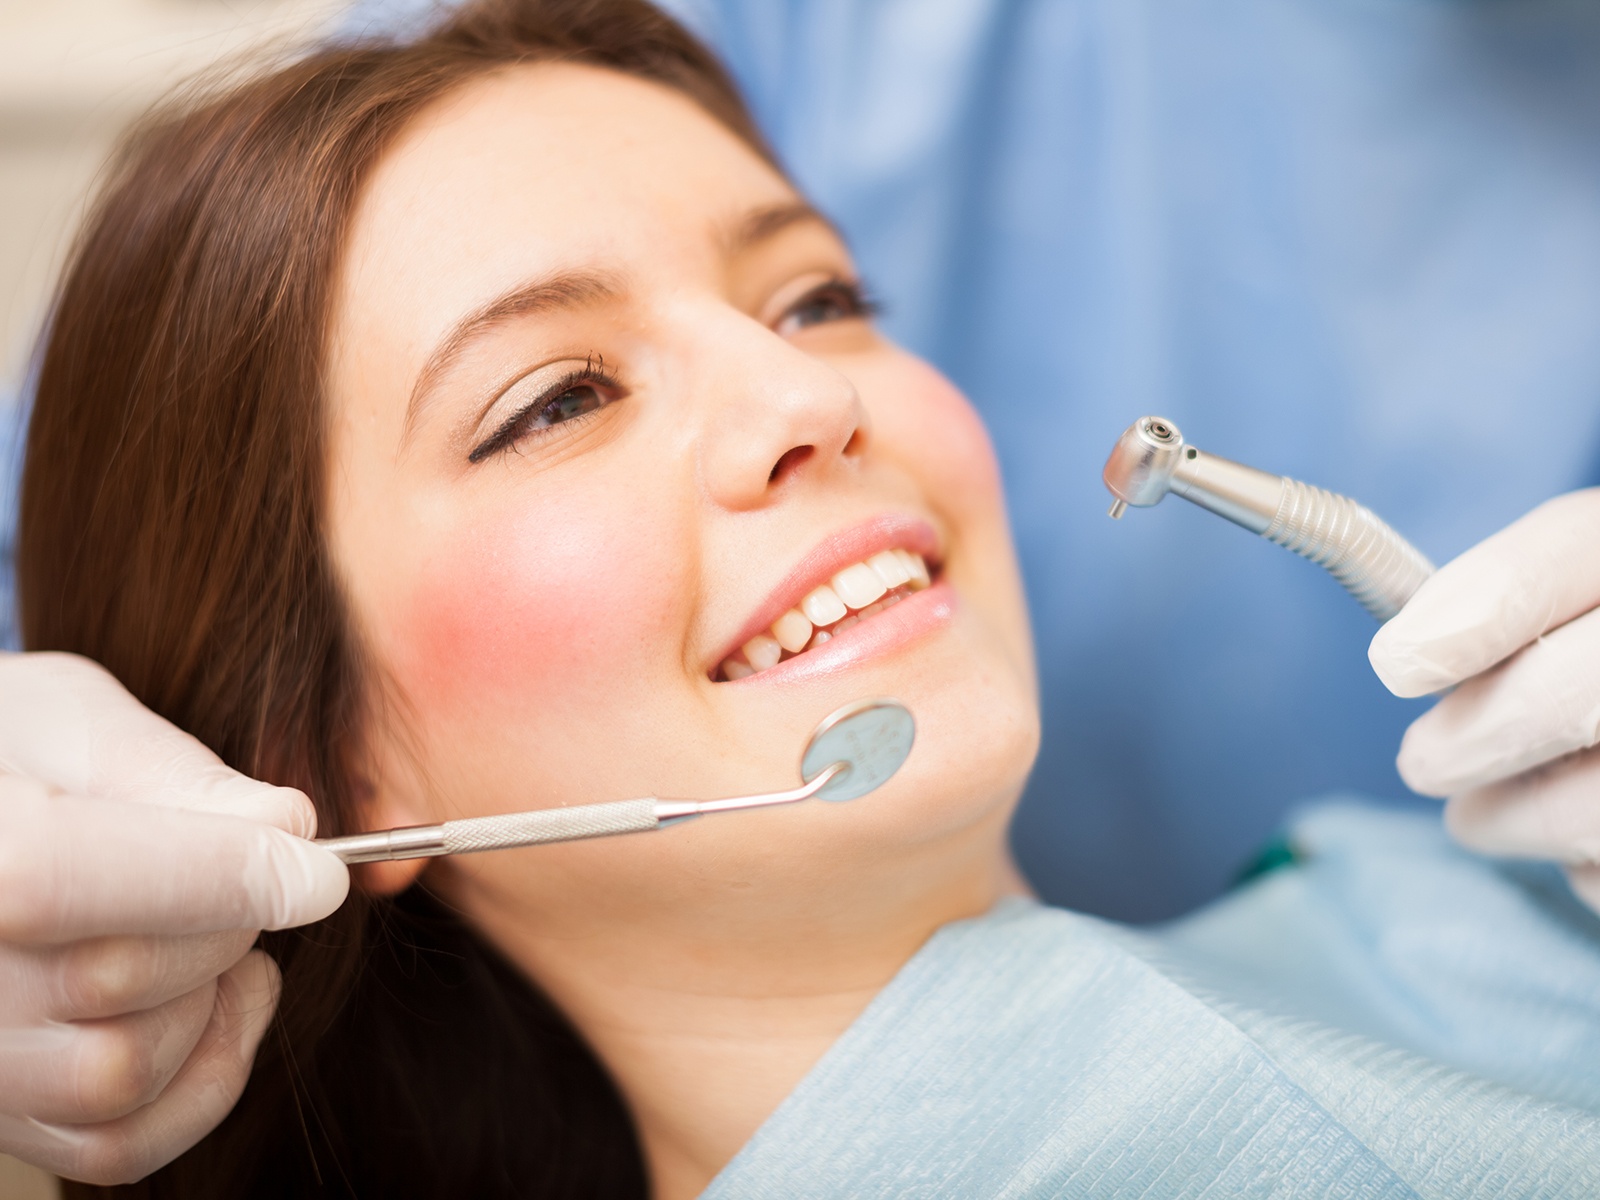 What is the alternative for a root canal?